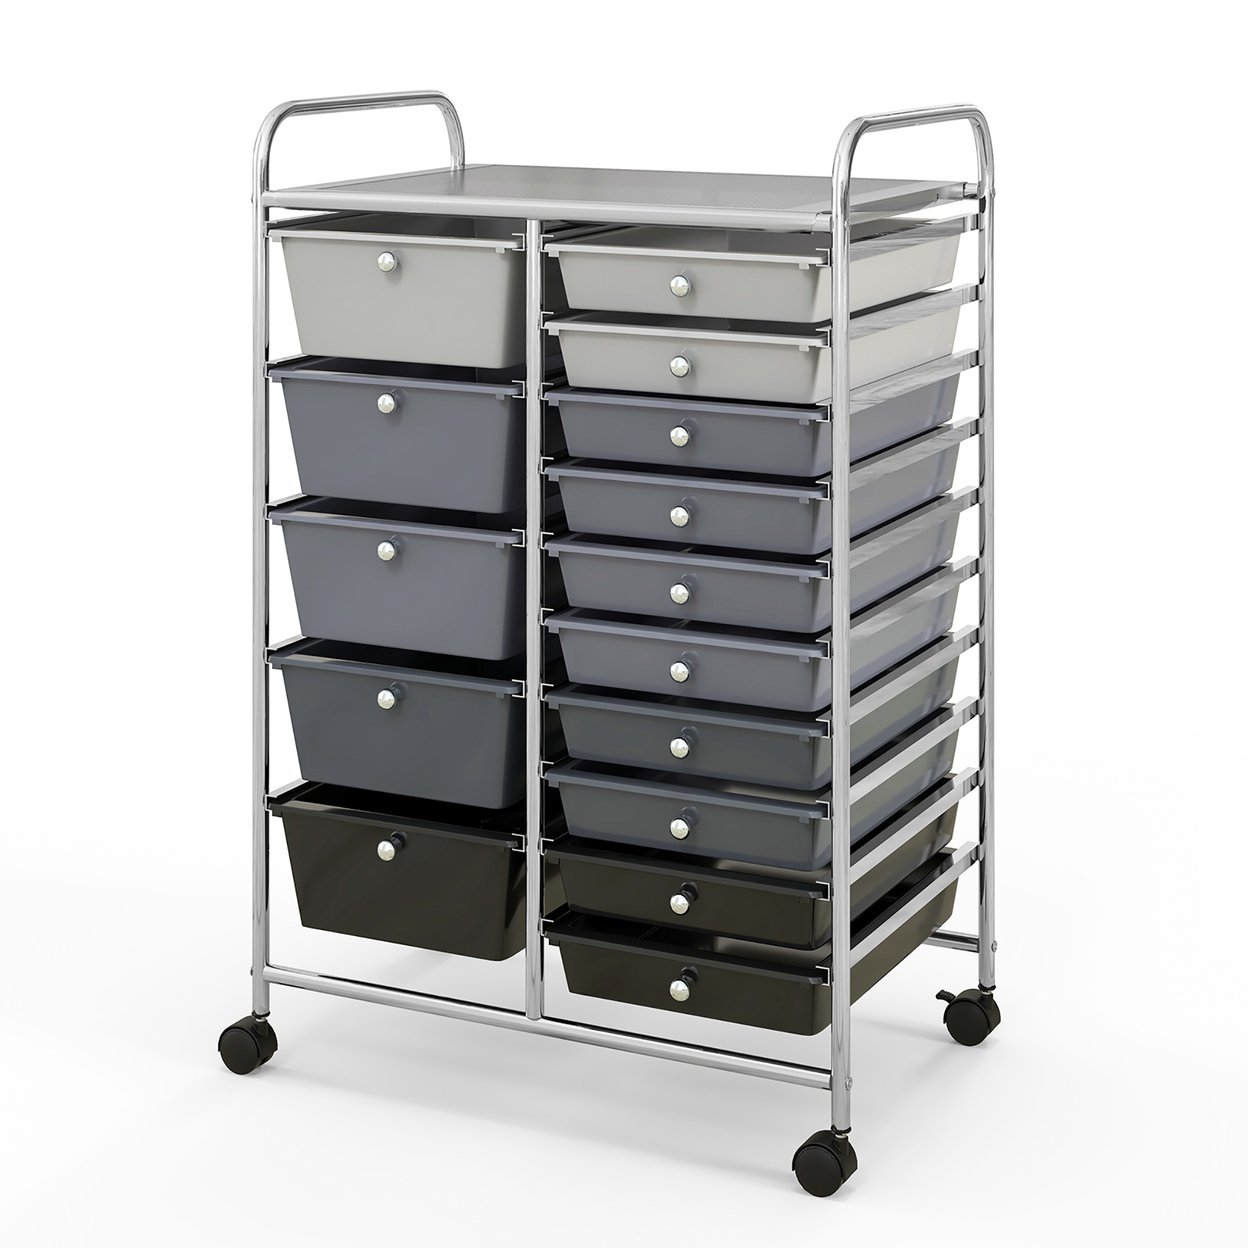 15 Drawer Rolling Storage Cart Opaque Multicolor Drawers Home Organizer - Silver, Mixed Black